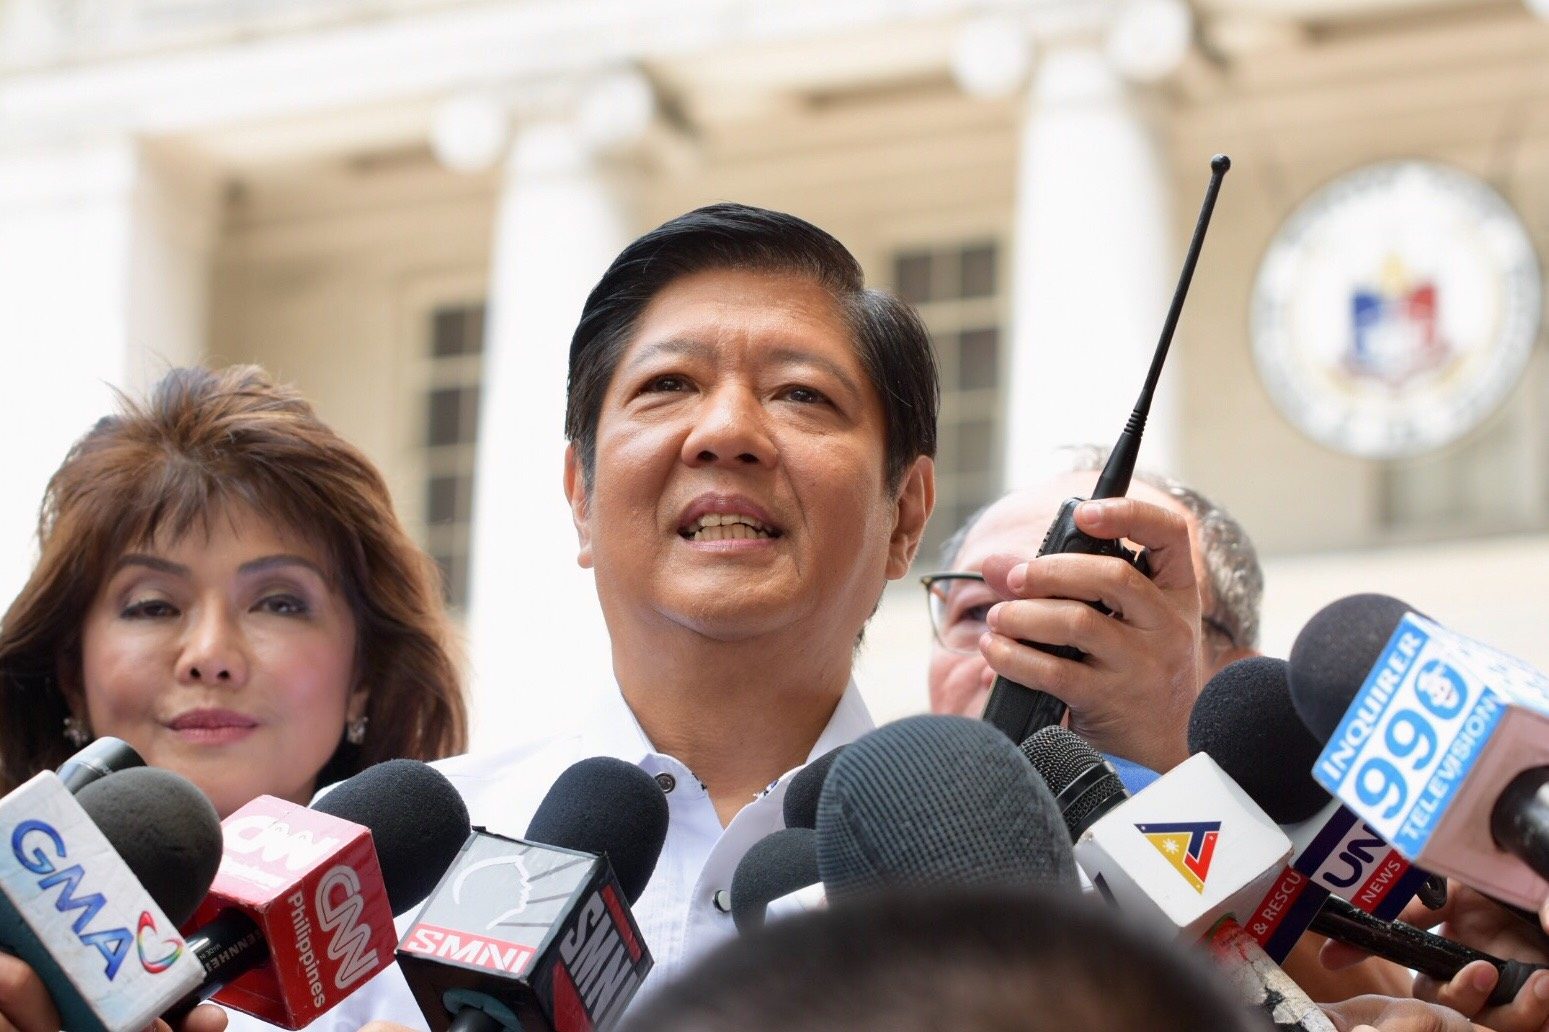 Imee, Bongbong Marcos were beneficiaries of illegal Swiss foundations